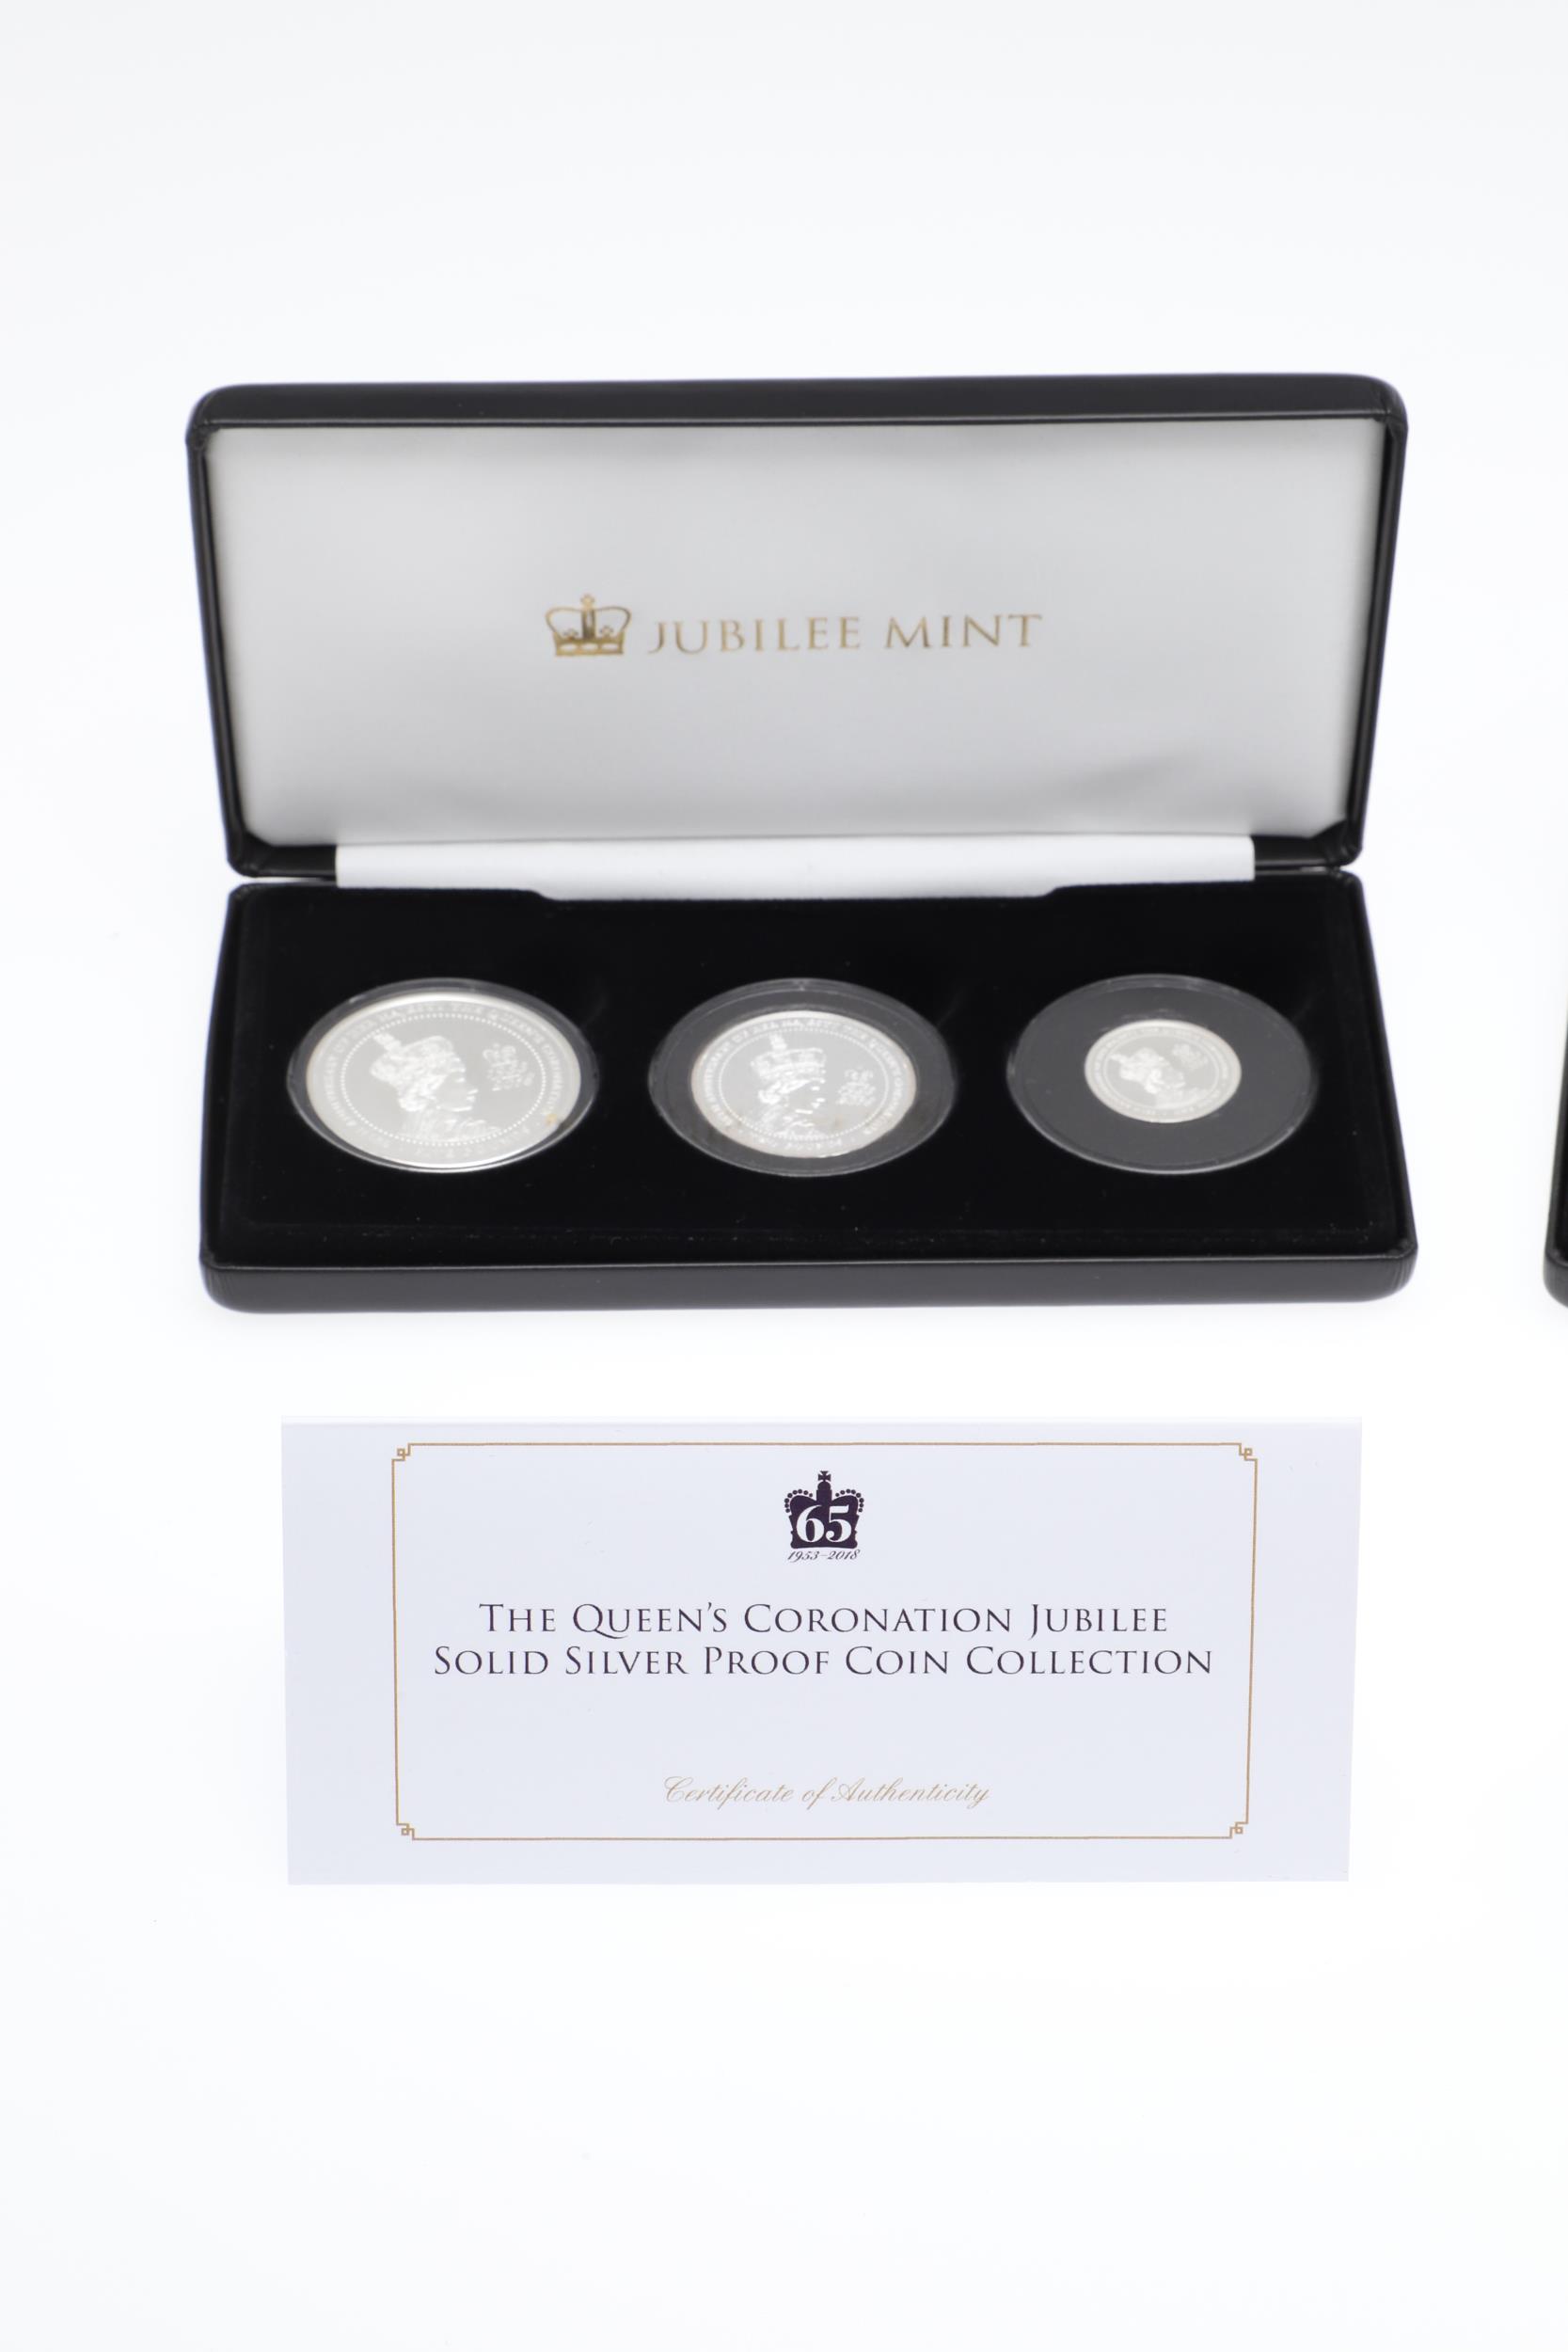 THREE JUBILEE MINT THREE COIN SILVER PROOF ROYALTY THEMED ISSUES, 2014, 2016 AND 2018. - Image 5 of 10